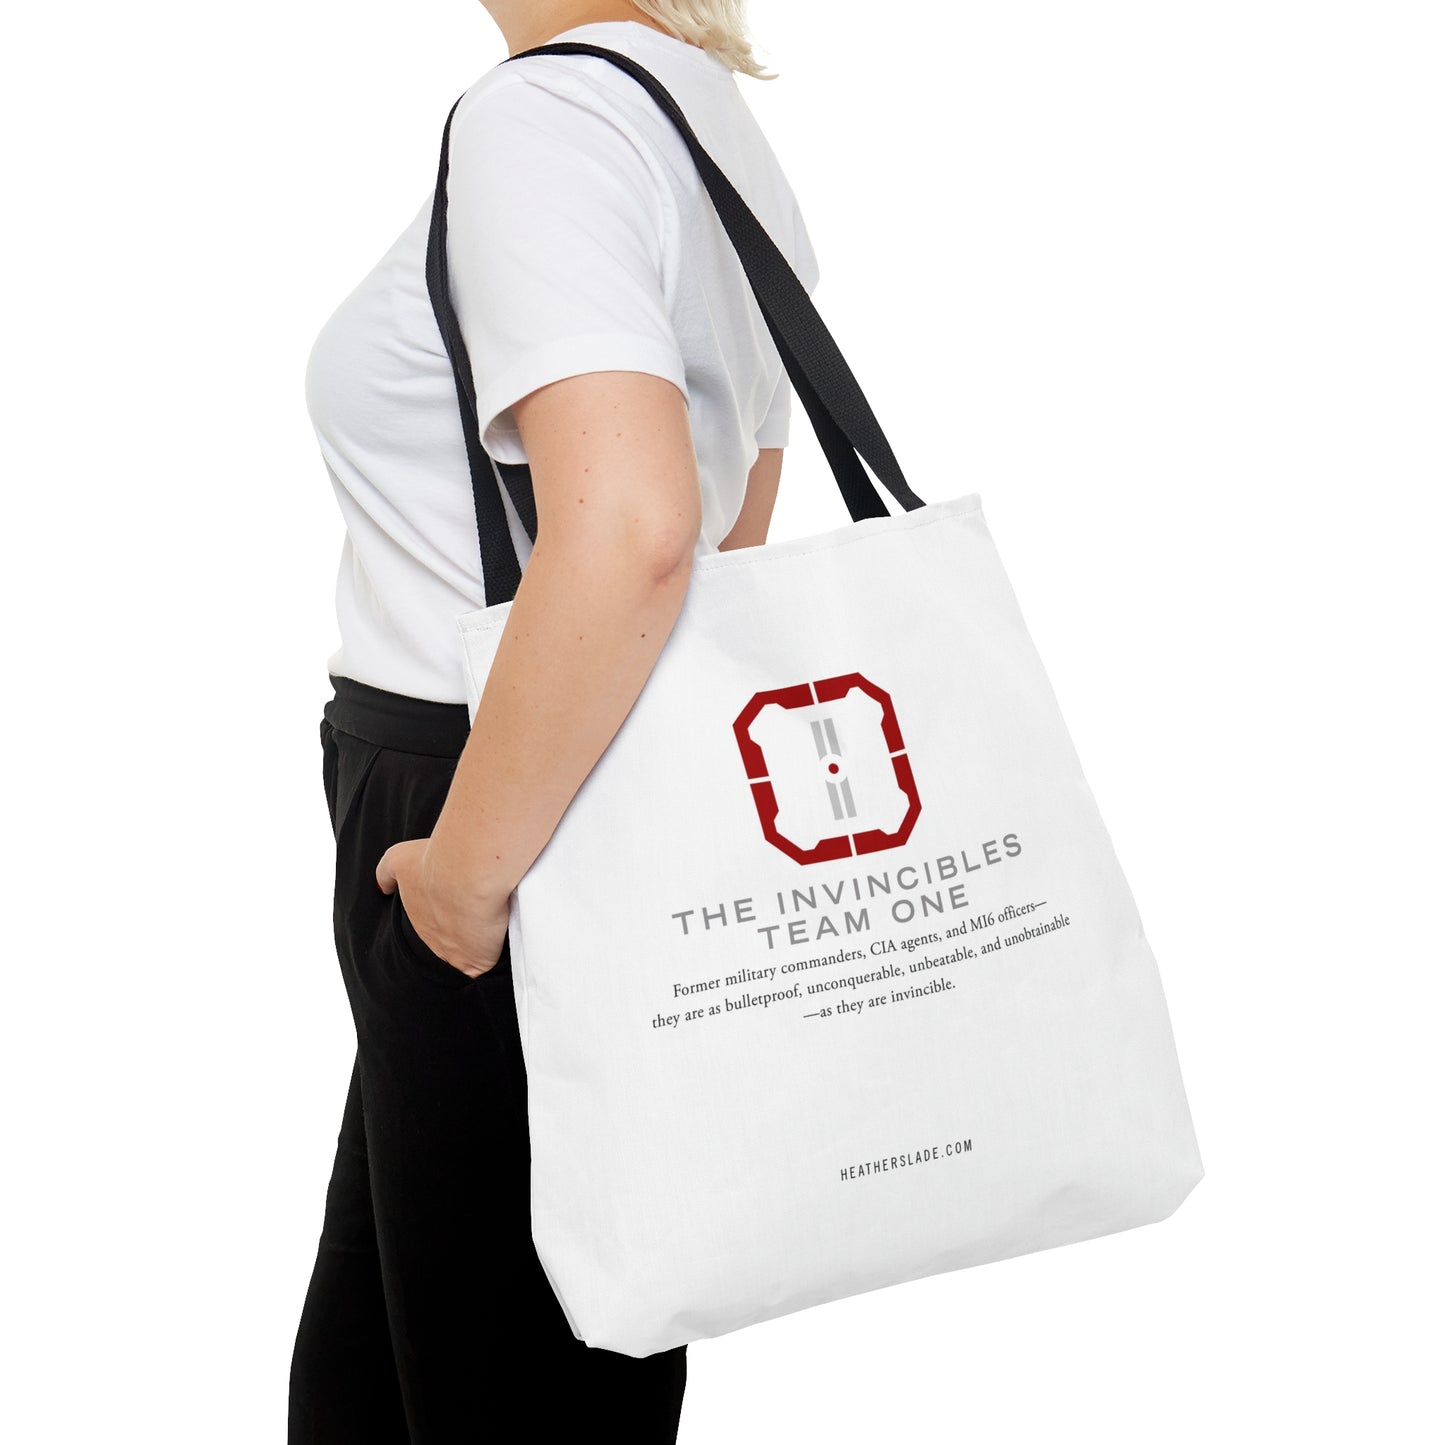 The Invincibles Team One Tote Bag